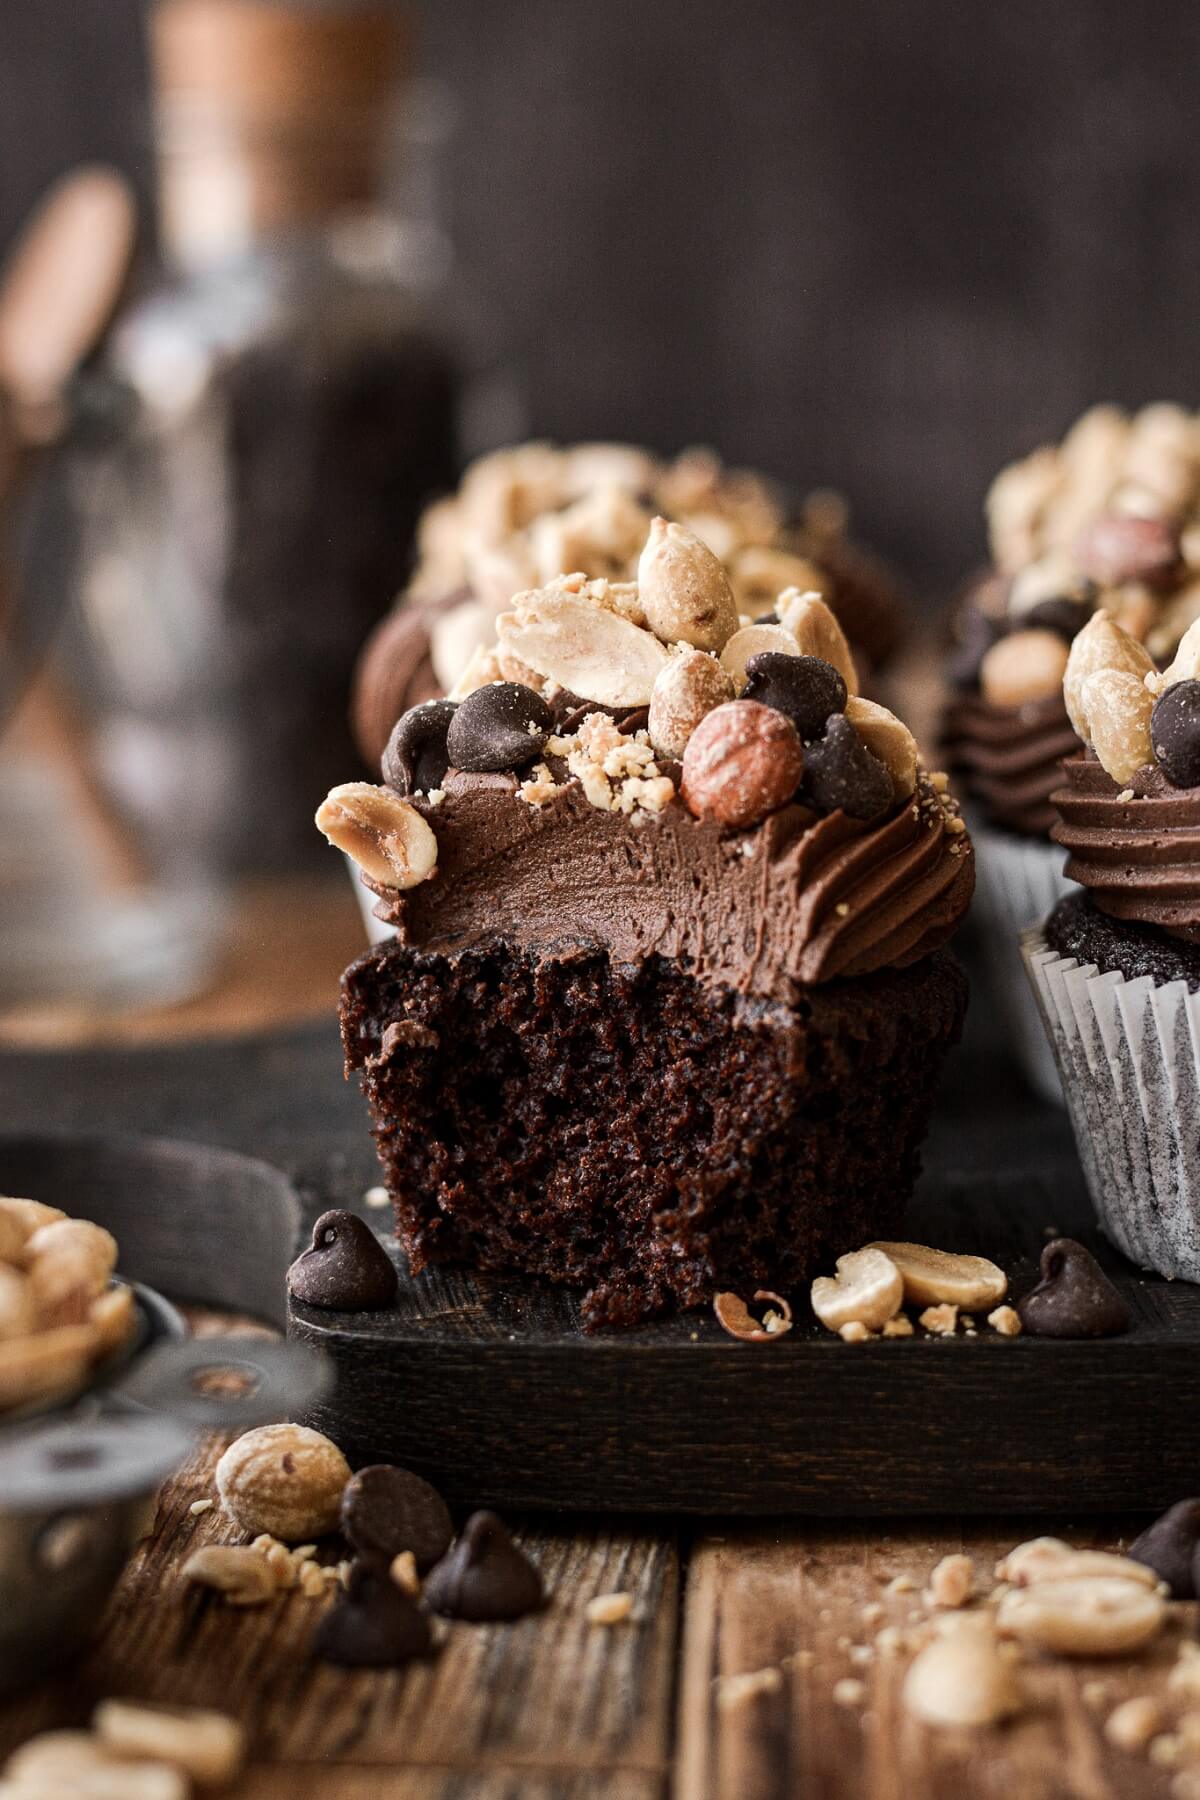 Chocolate peanut cluster cupcake with a bite taken.